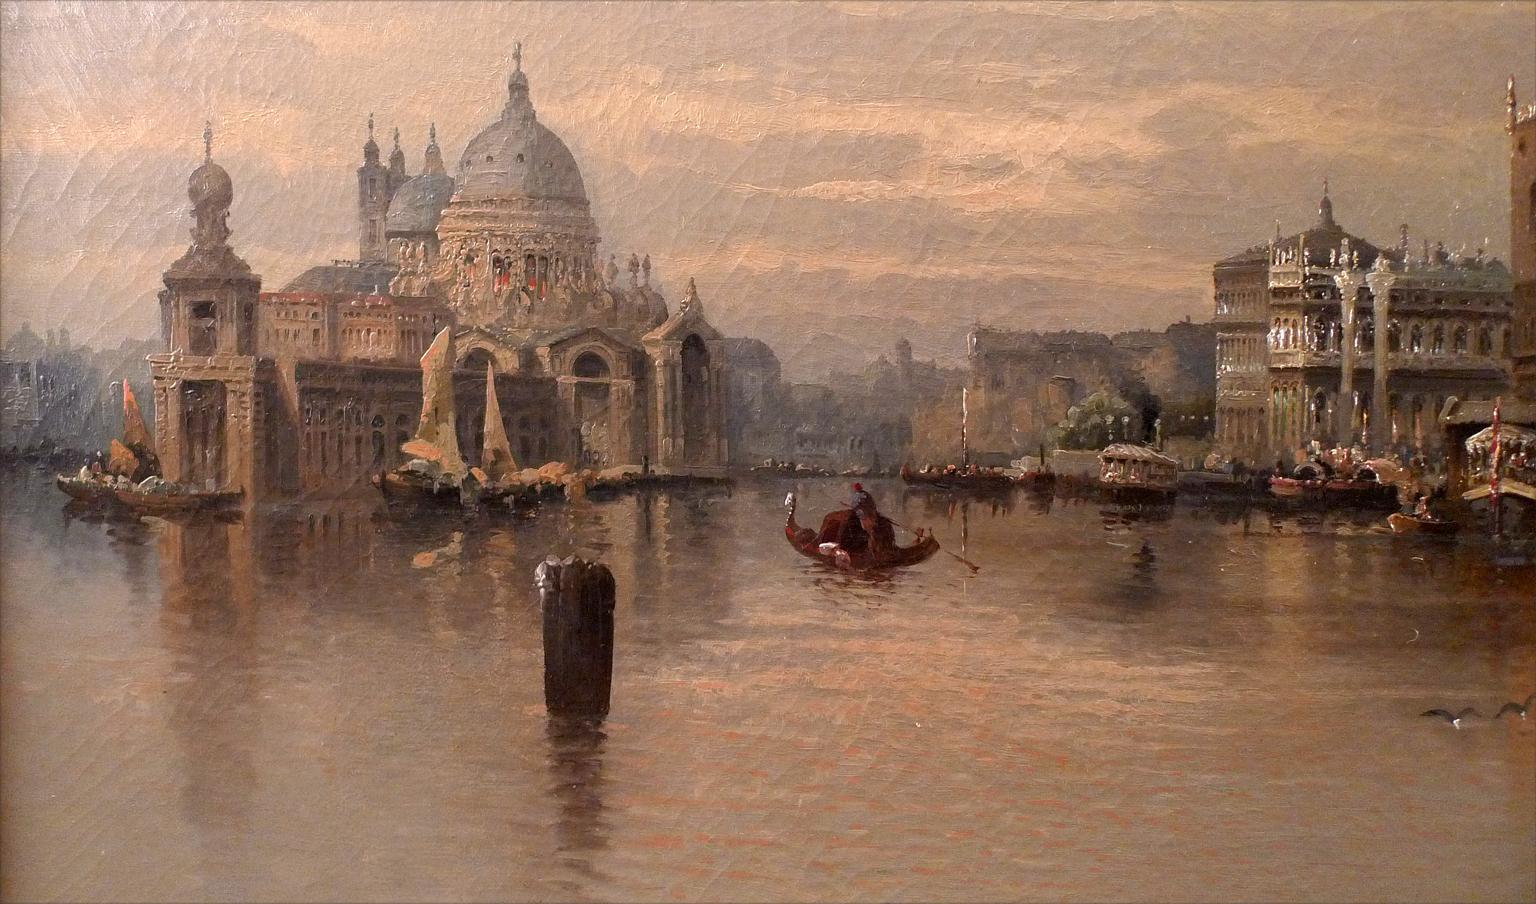 KARL KAUFMANN
Austrian, 1843 - 1901
VIEW OF VENICE OF THE DOGE'S PALACE, VENICE
signed & dated 